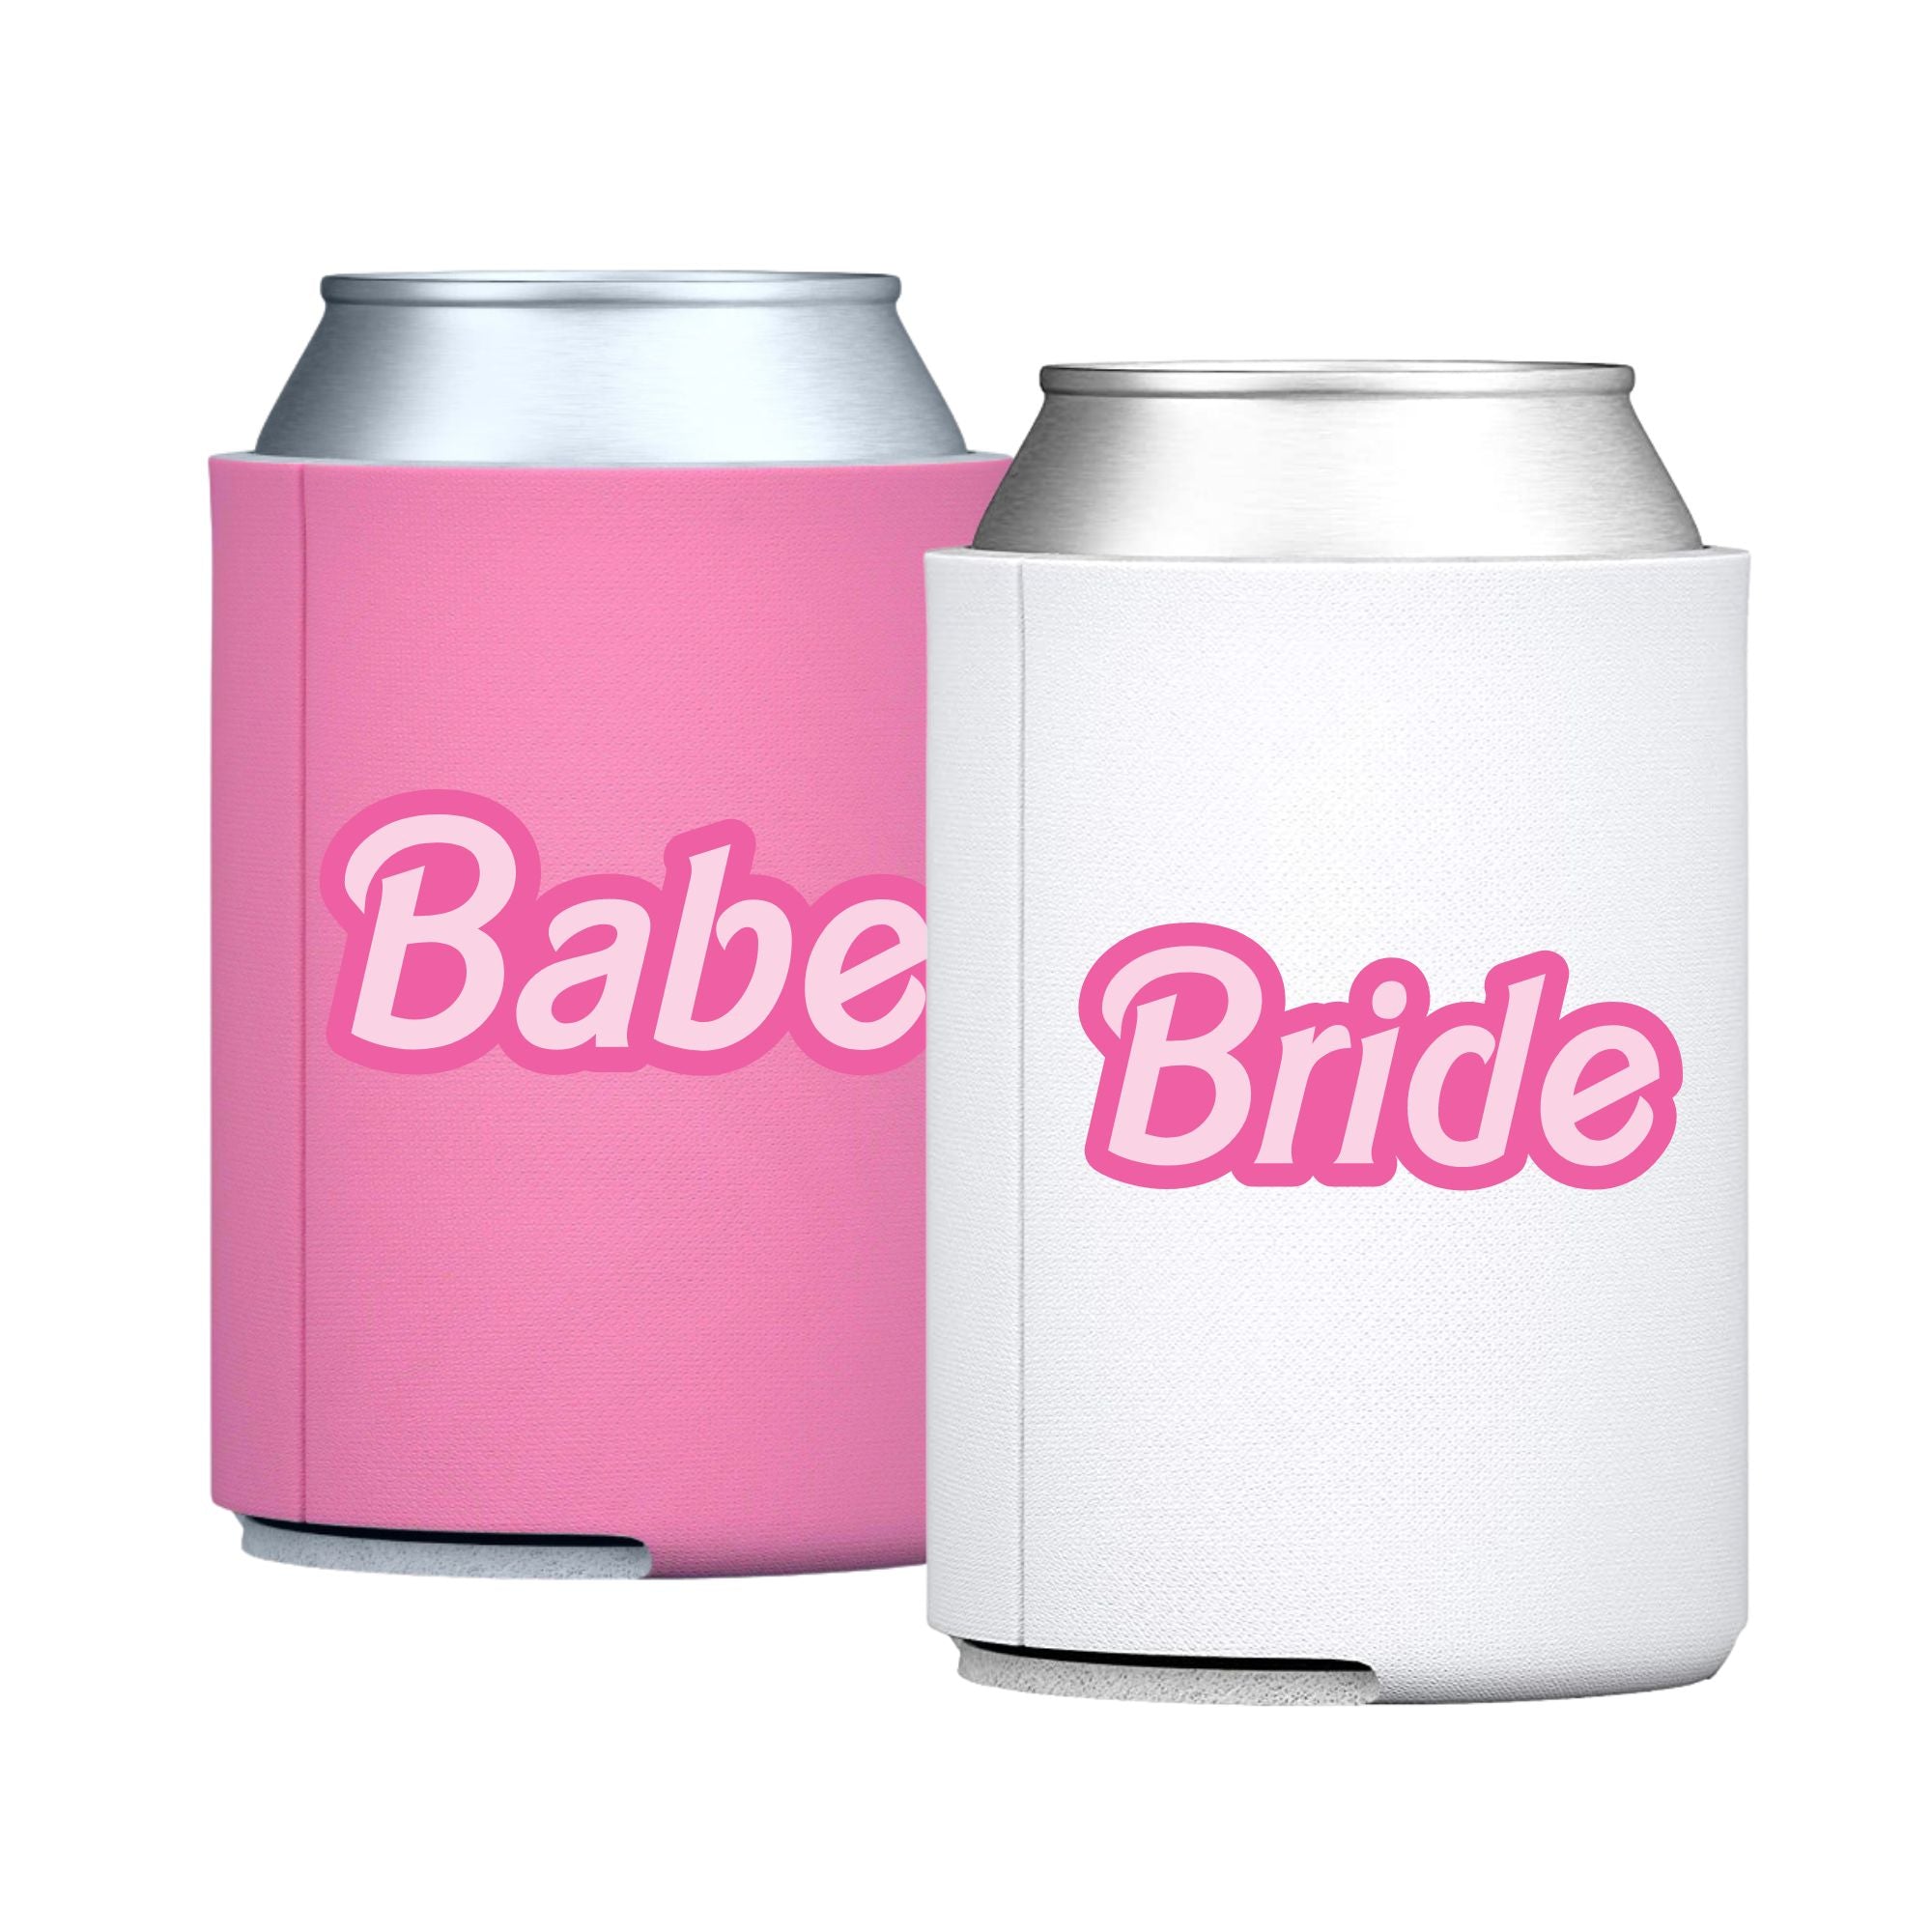 Let's Bach Party - Bride/Babe Can Coolers - Sprinkled With Pink #bachelorette #custom #gifts